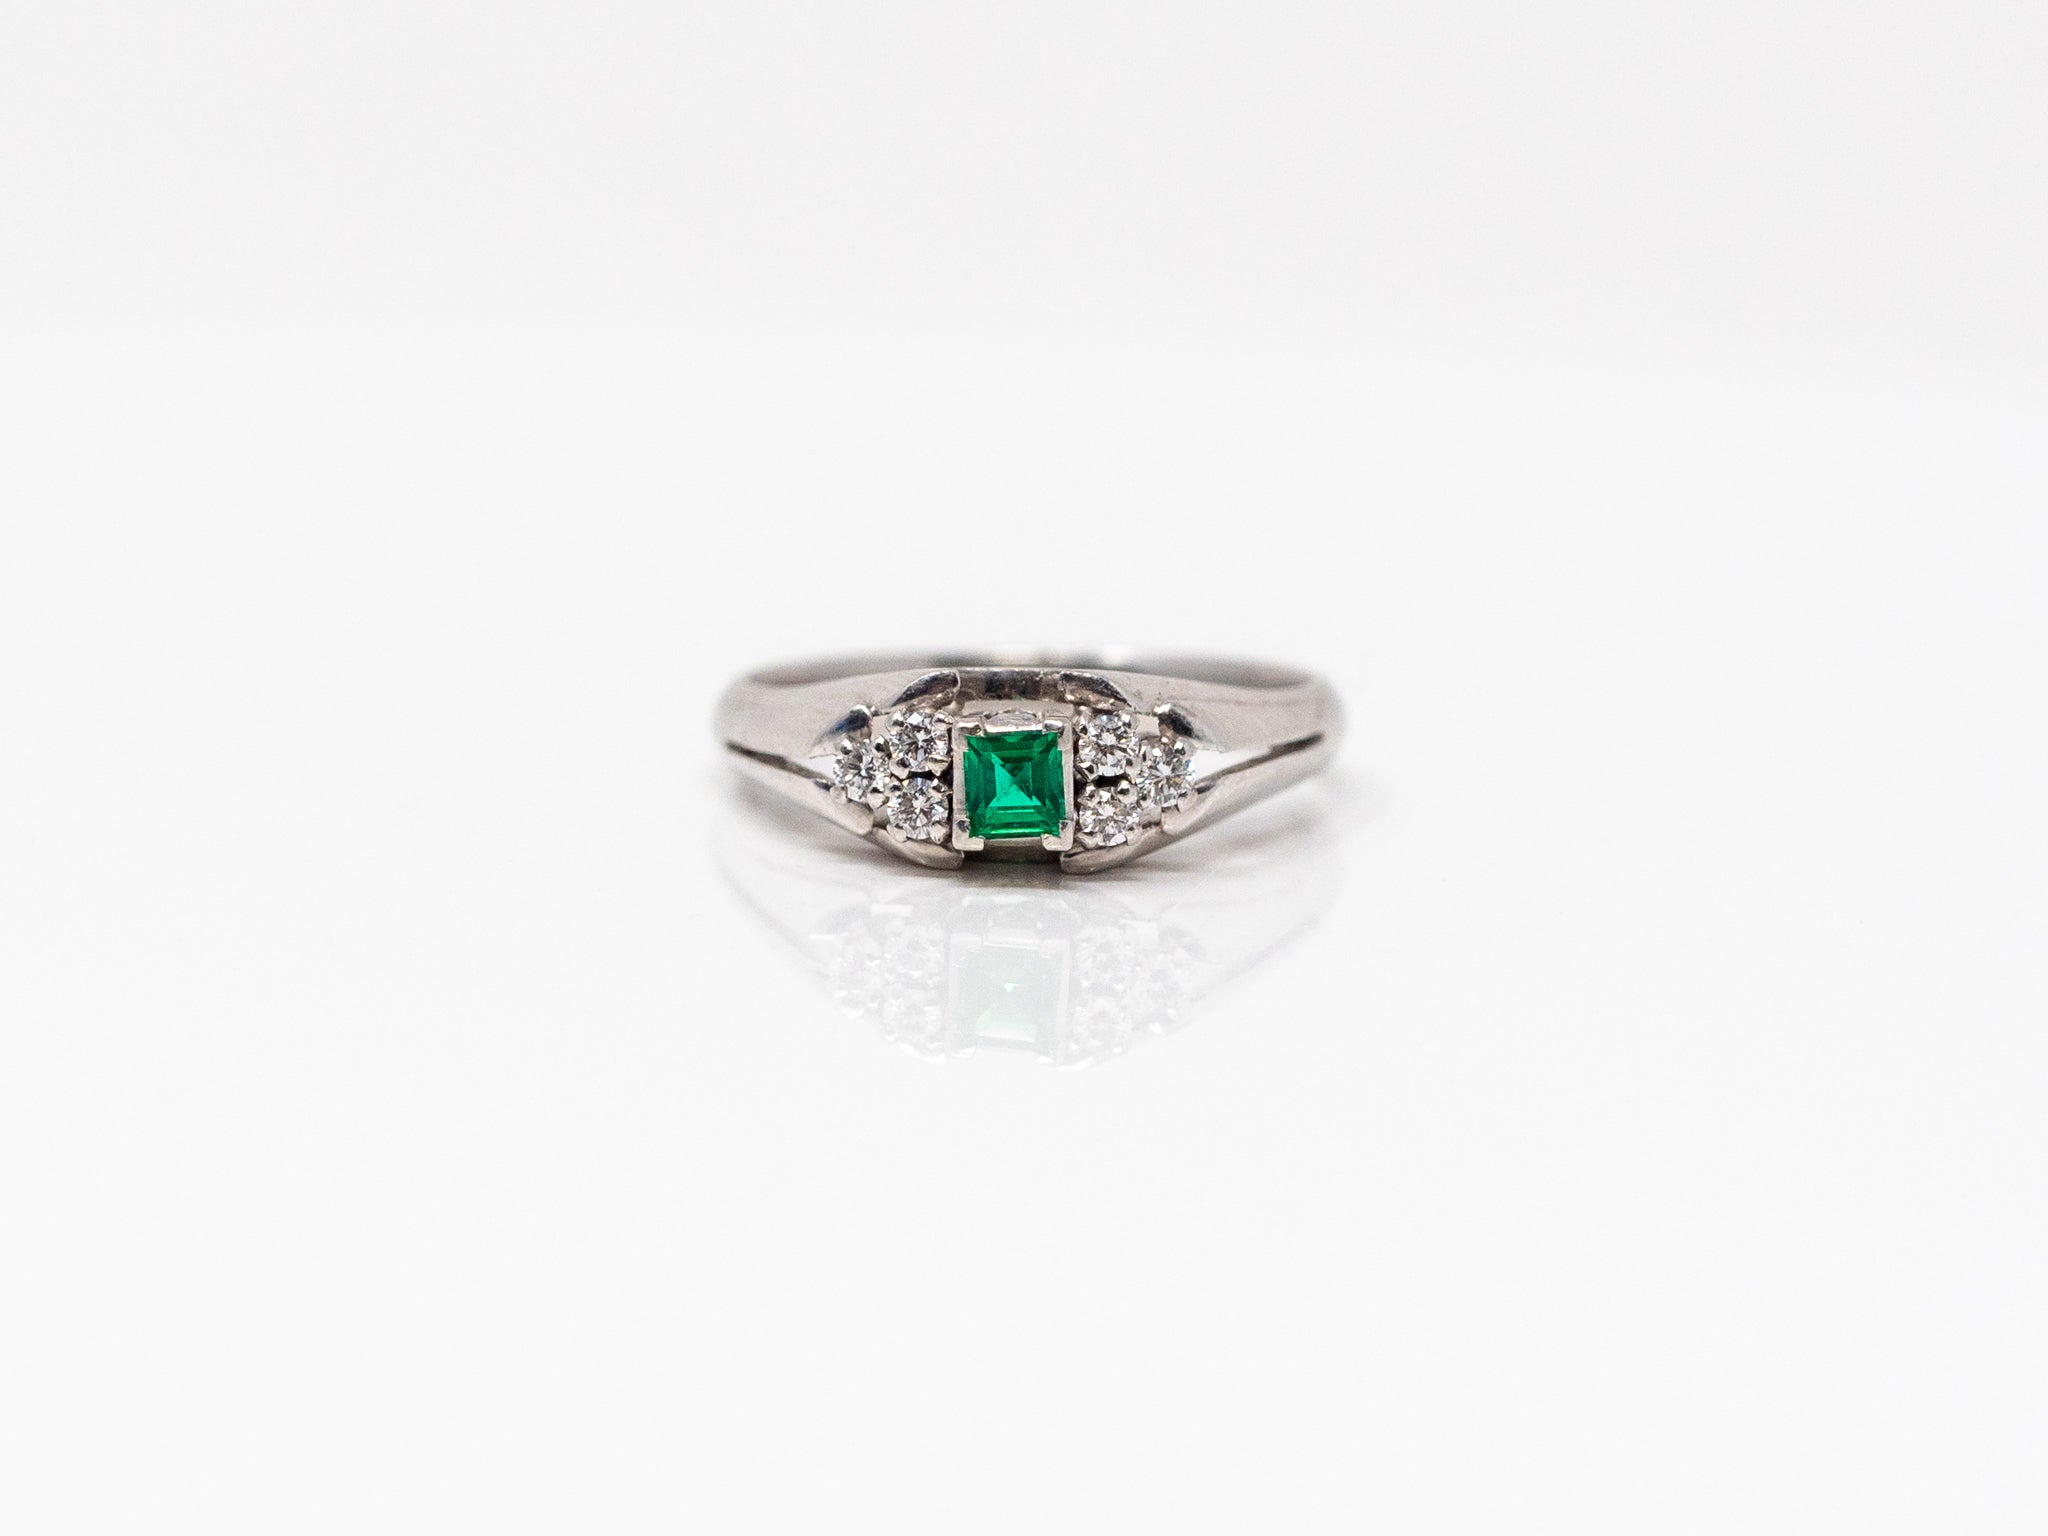 Princess-Cut Emerald with Diamond Accent Ring in Platinum 900 at a Size 6 3/4